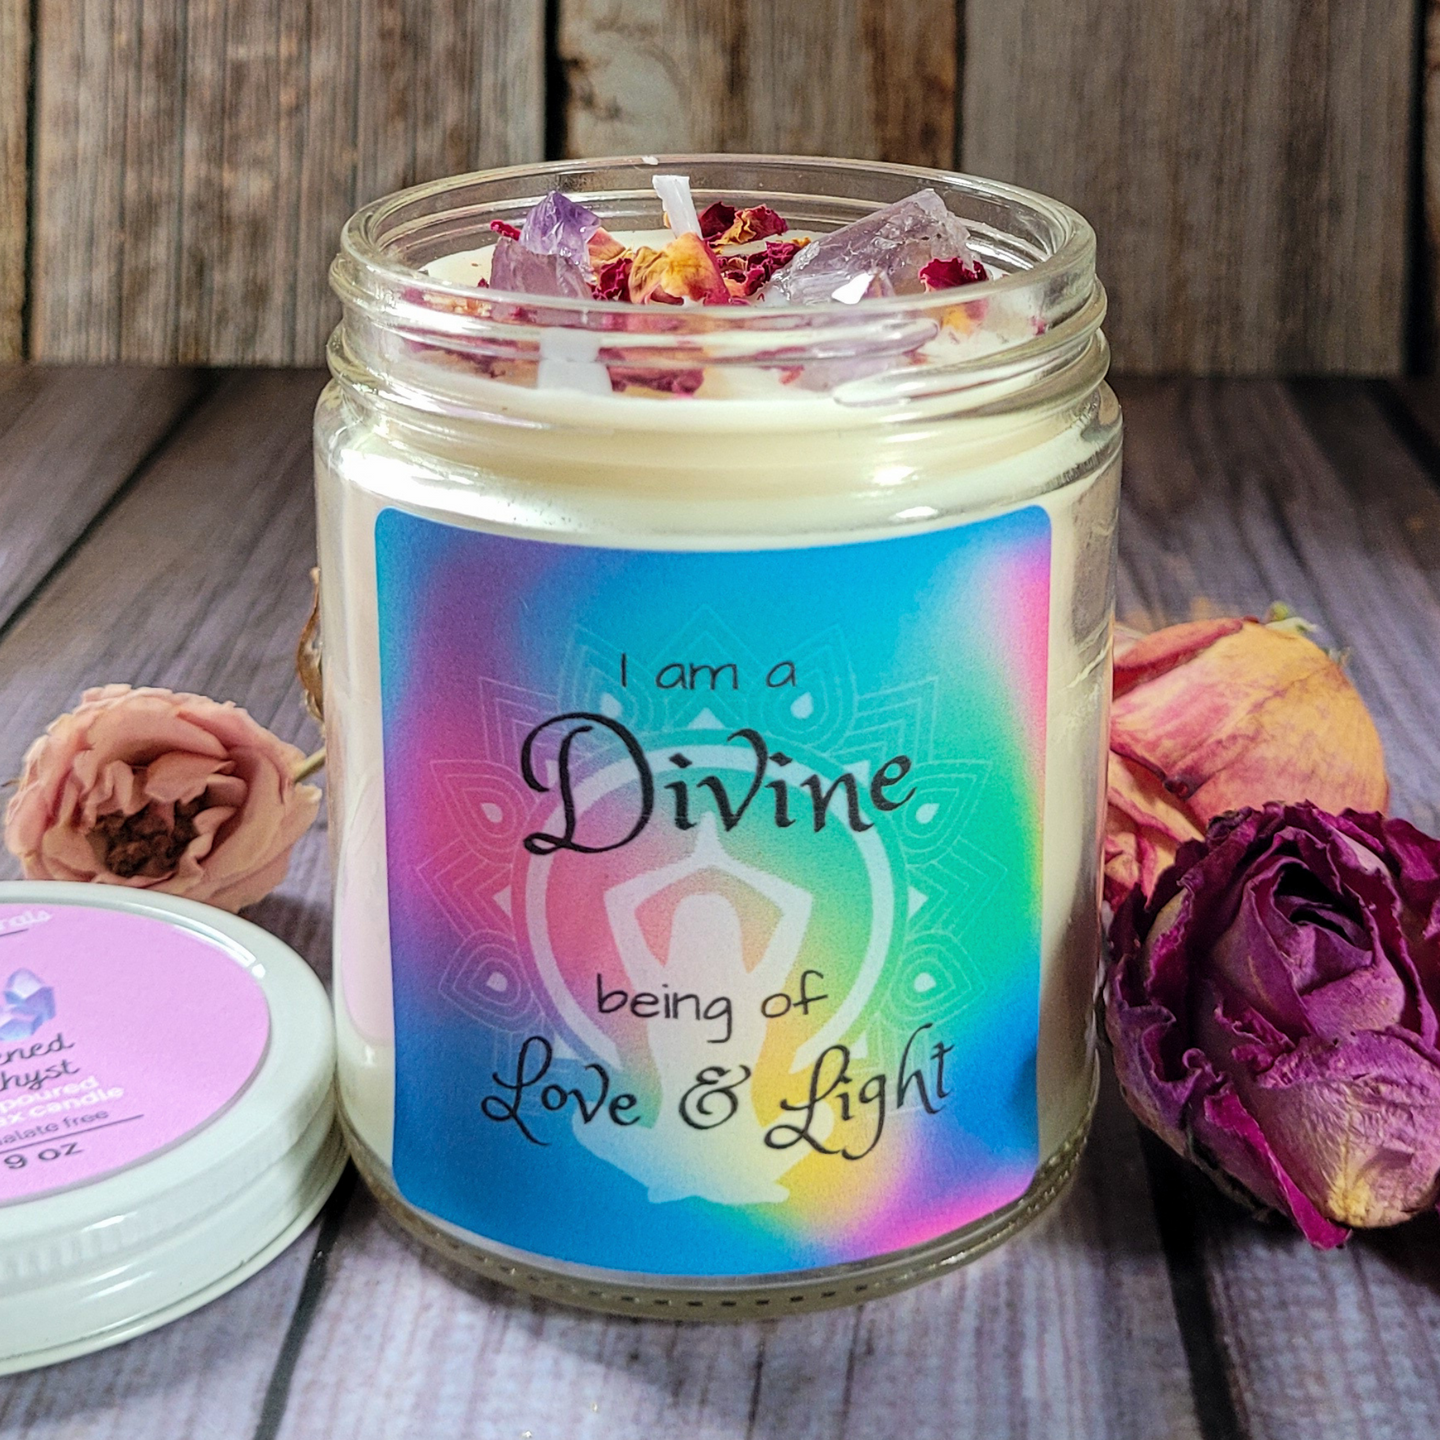 Self Empowerment Intention Candle (Blackened Amethyst) - 9 oz